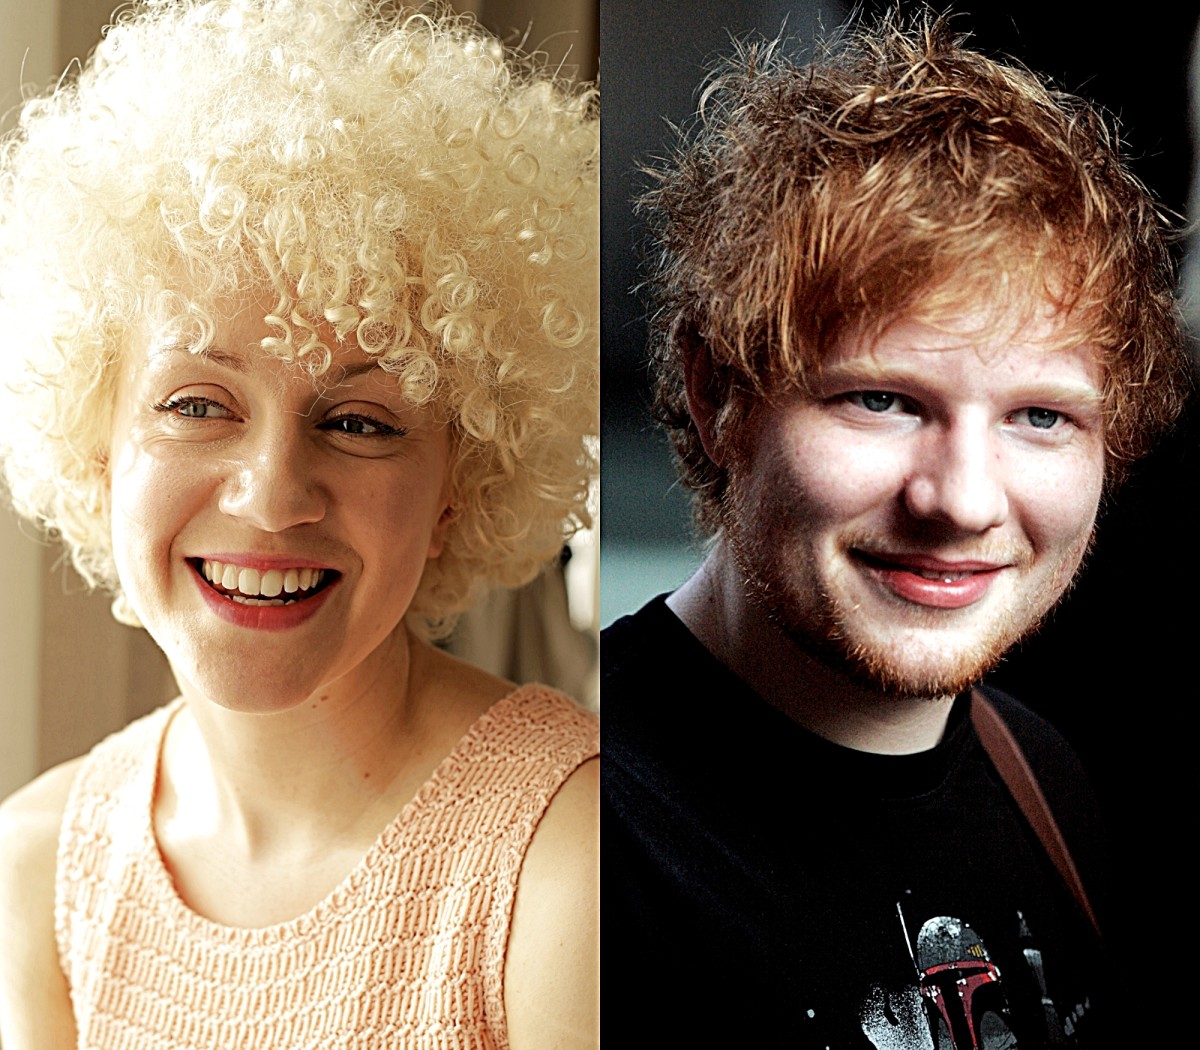 Fiona Bevan and Ed Sheeran wrote "Little Things" for One Direction, a 2012 hit about a person's so-called flaws making them unique and worthy of love ("I'm in love with you and all these little things").